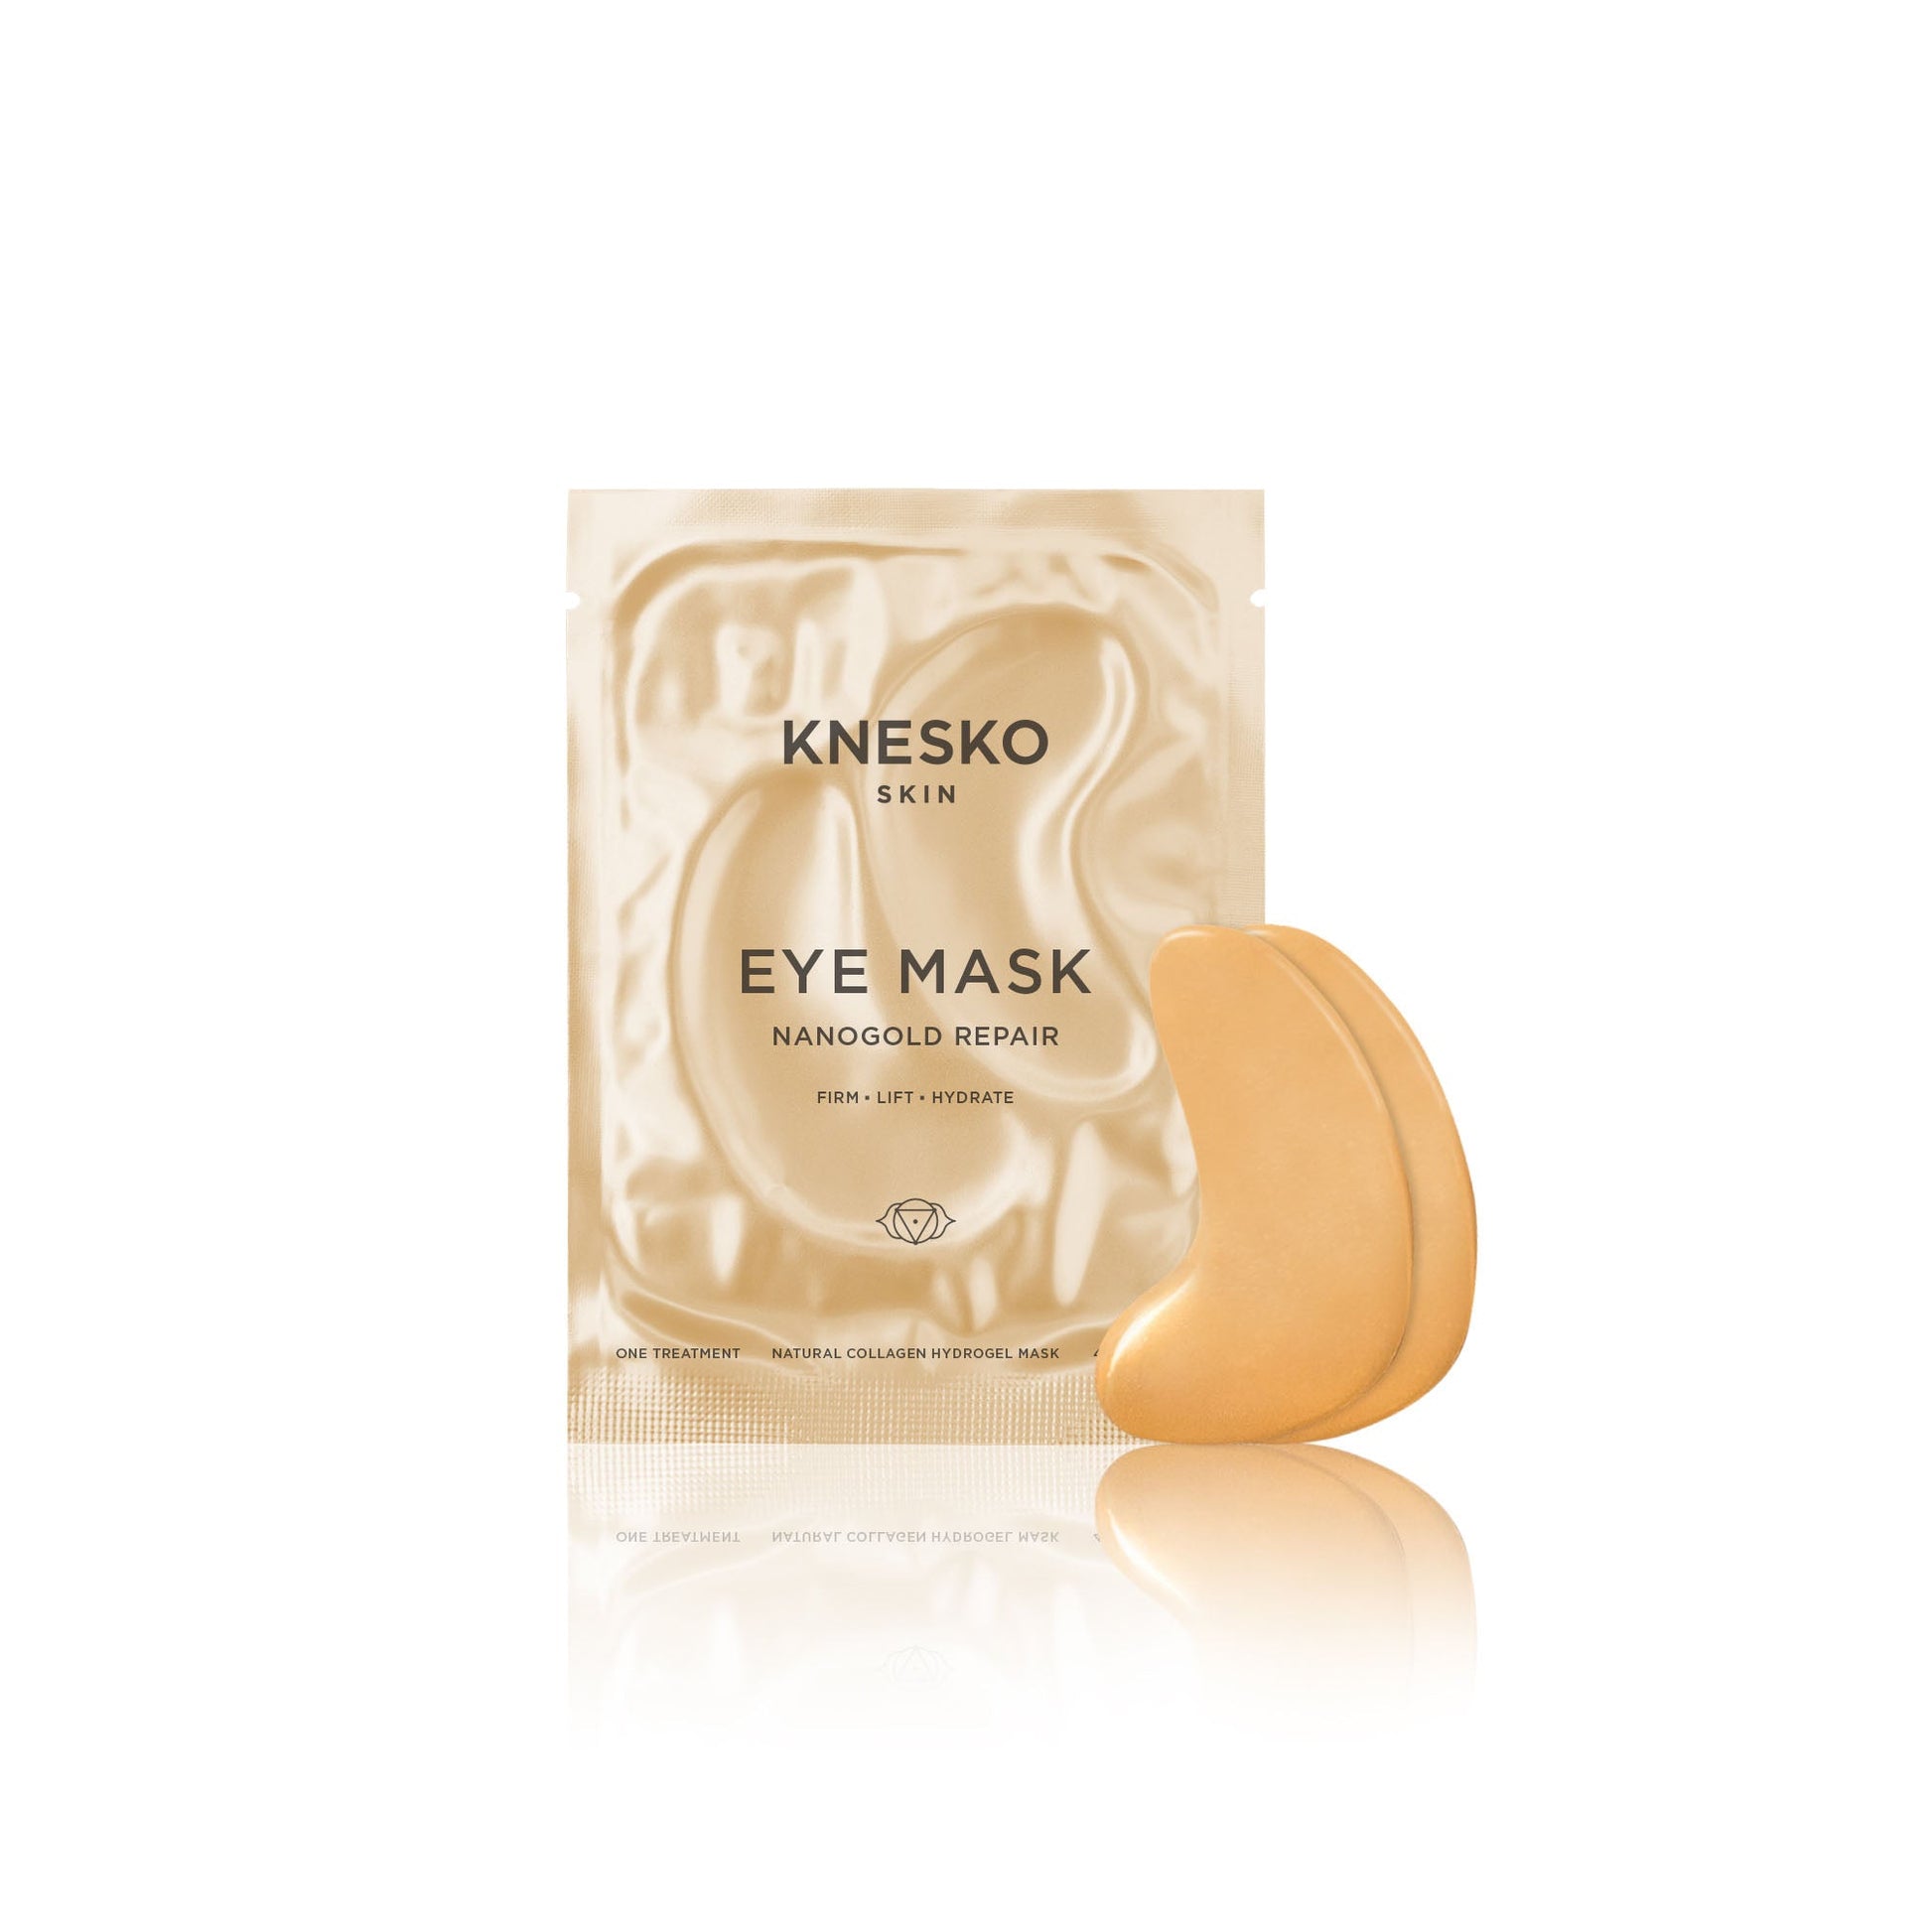 Buy Online Best Nanogold Eye Mask | Buy innovative clinical skincare products - TOPBODY